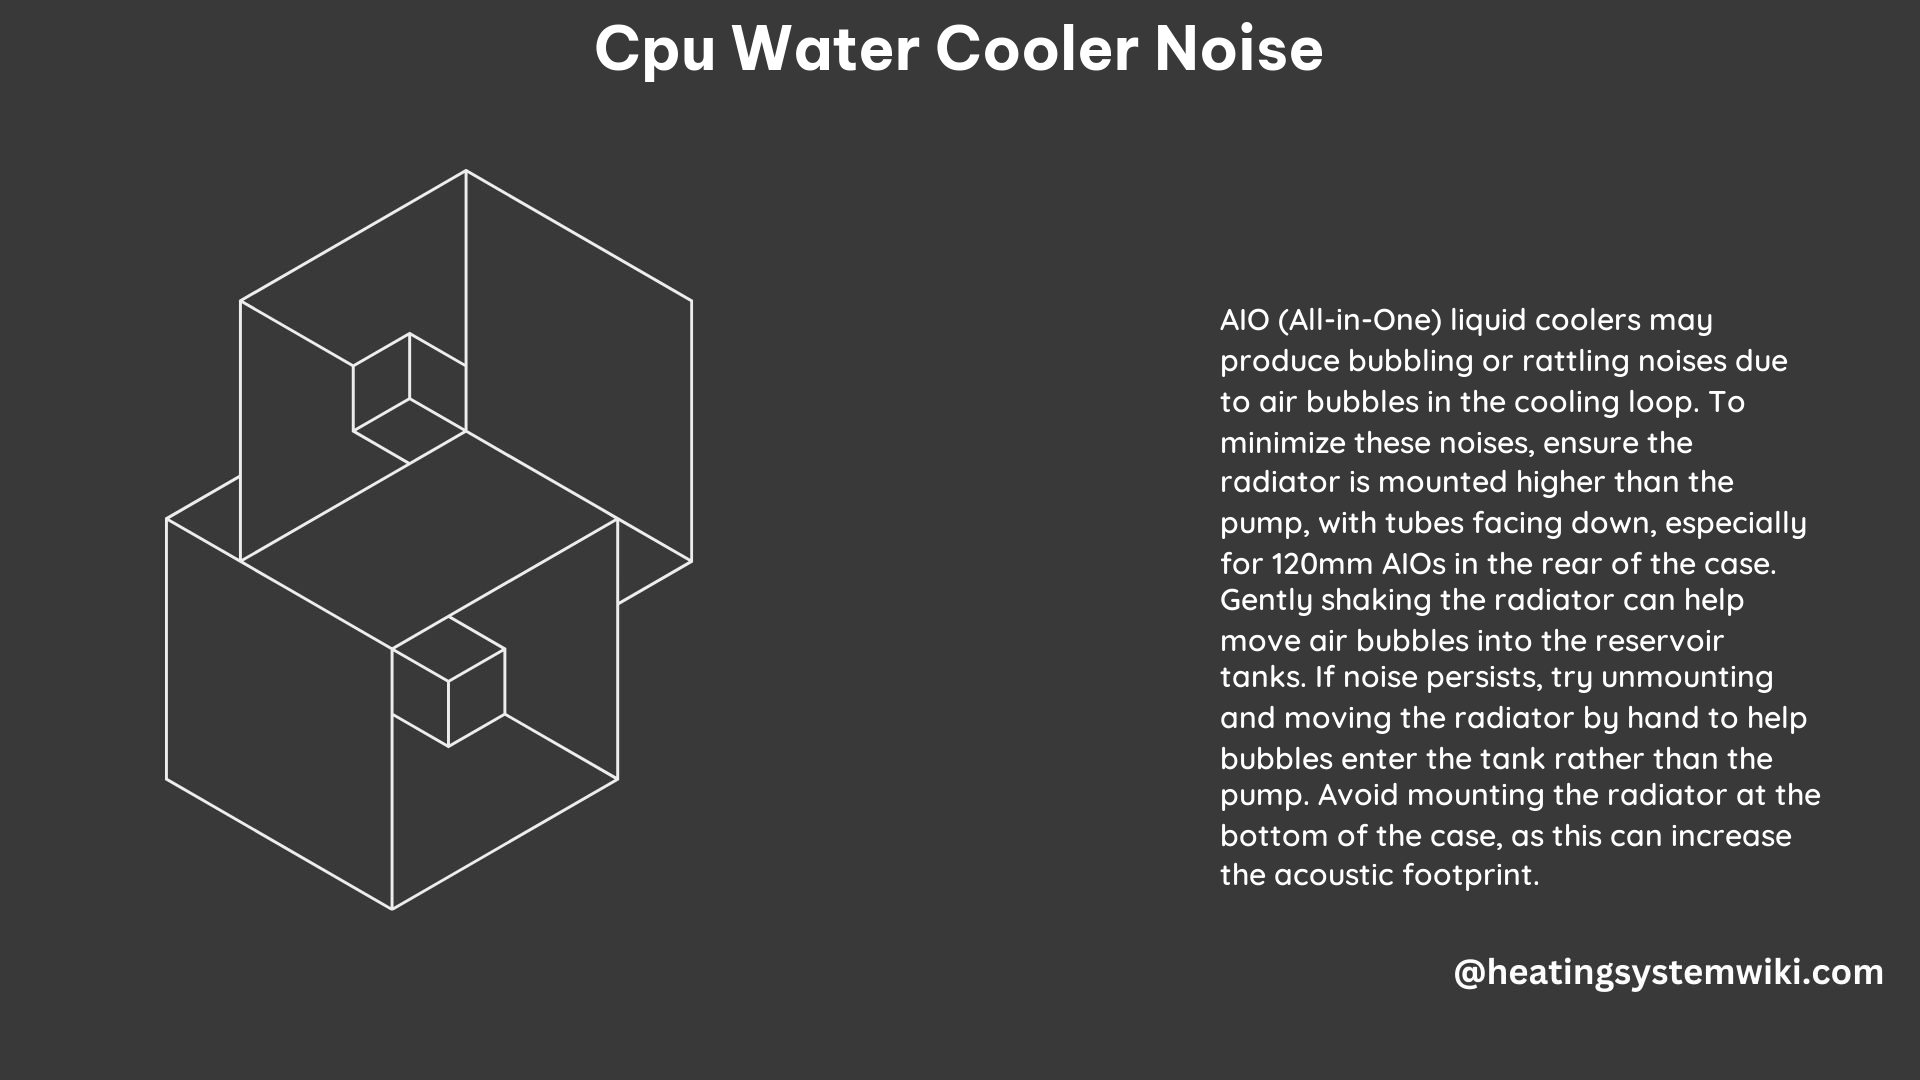 CPU Water Cooler Noise